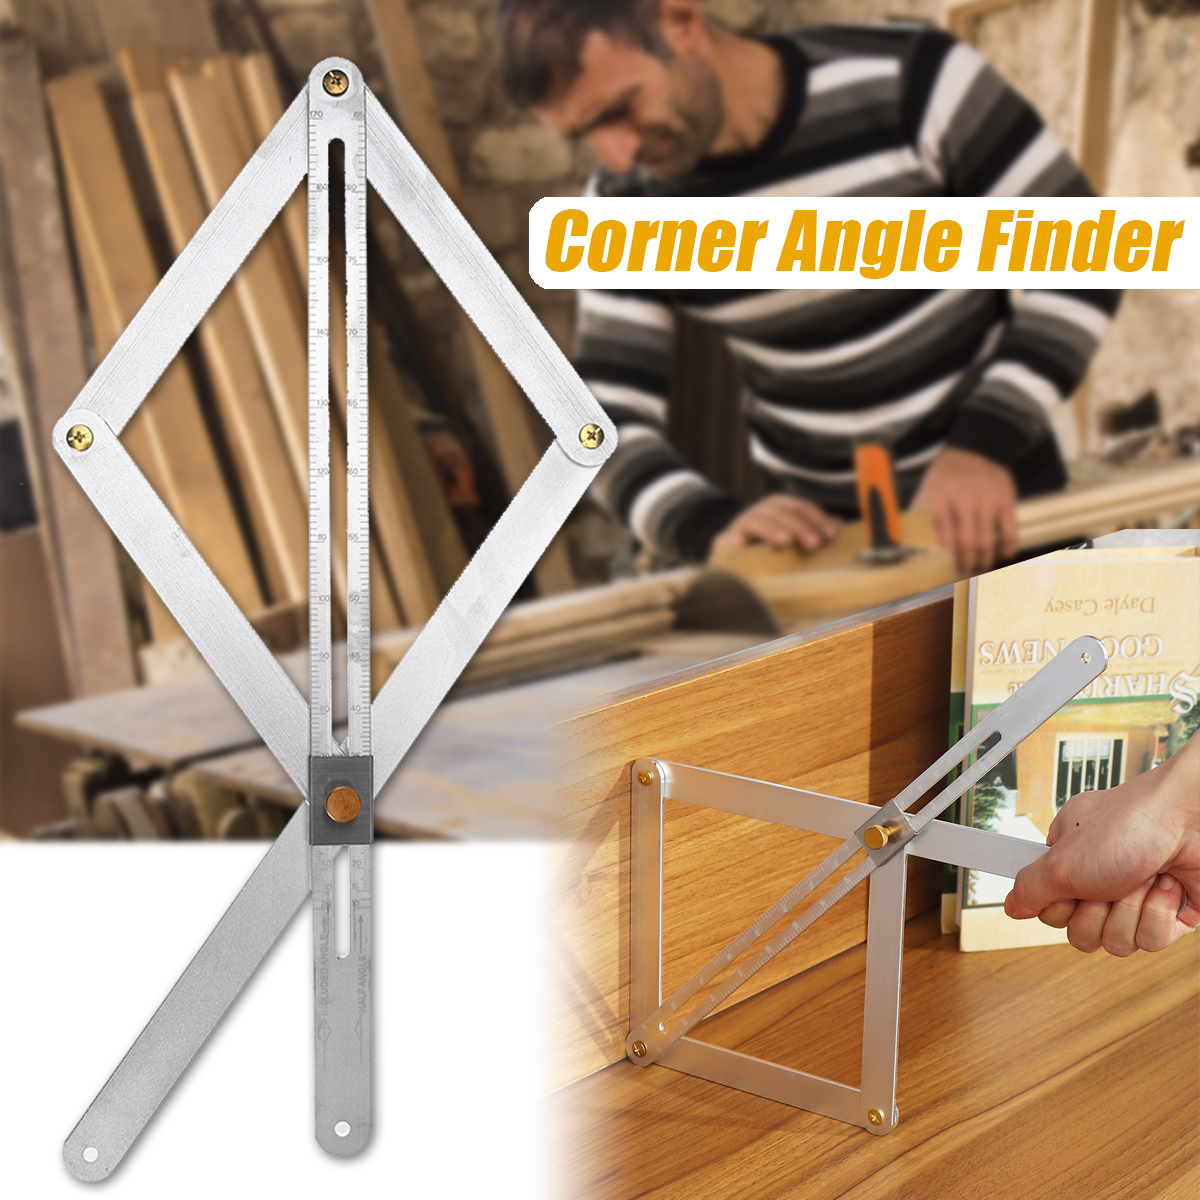 Aluminum Alloy Corner Angle Finder Wood Ceiling Artifact Square Protractor Ruler Tool